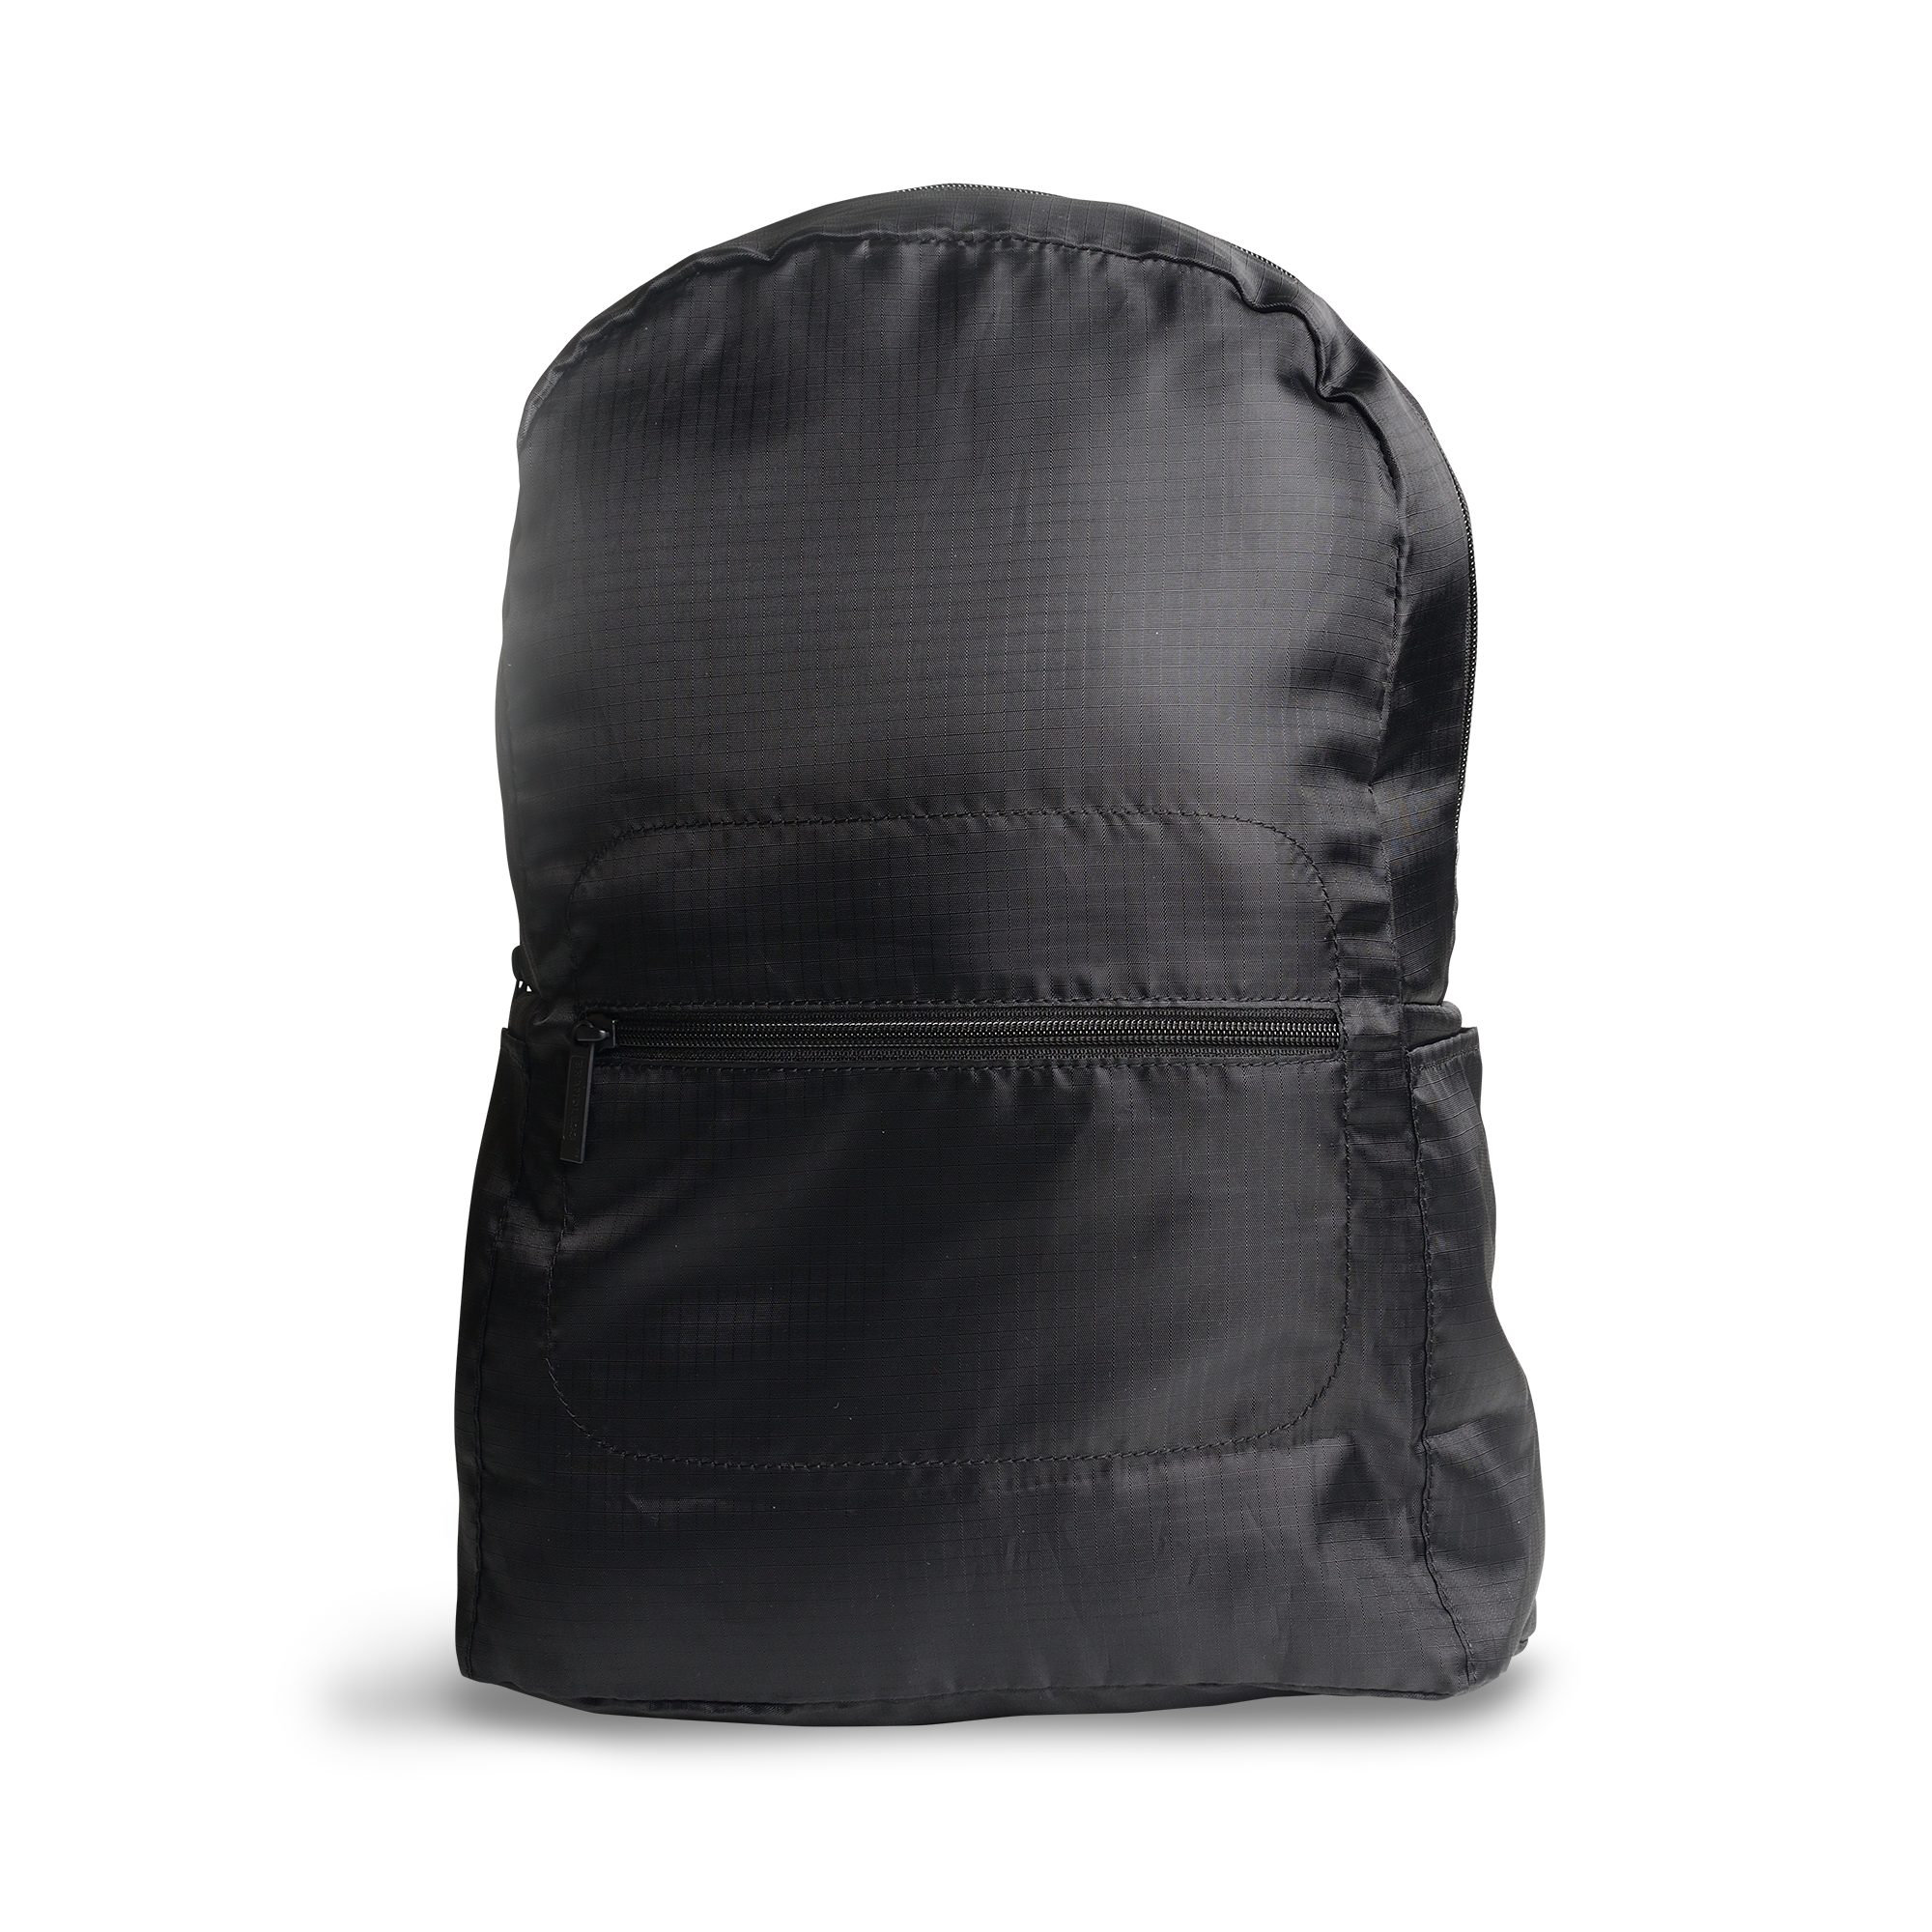 Foldable backpack, front, black. Showing front zipper compartment and side pouch.